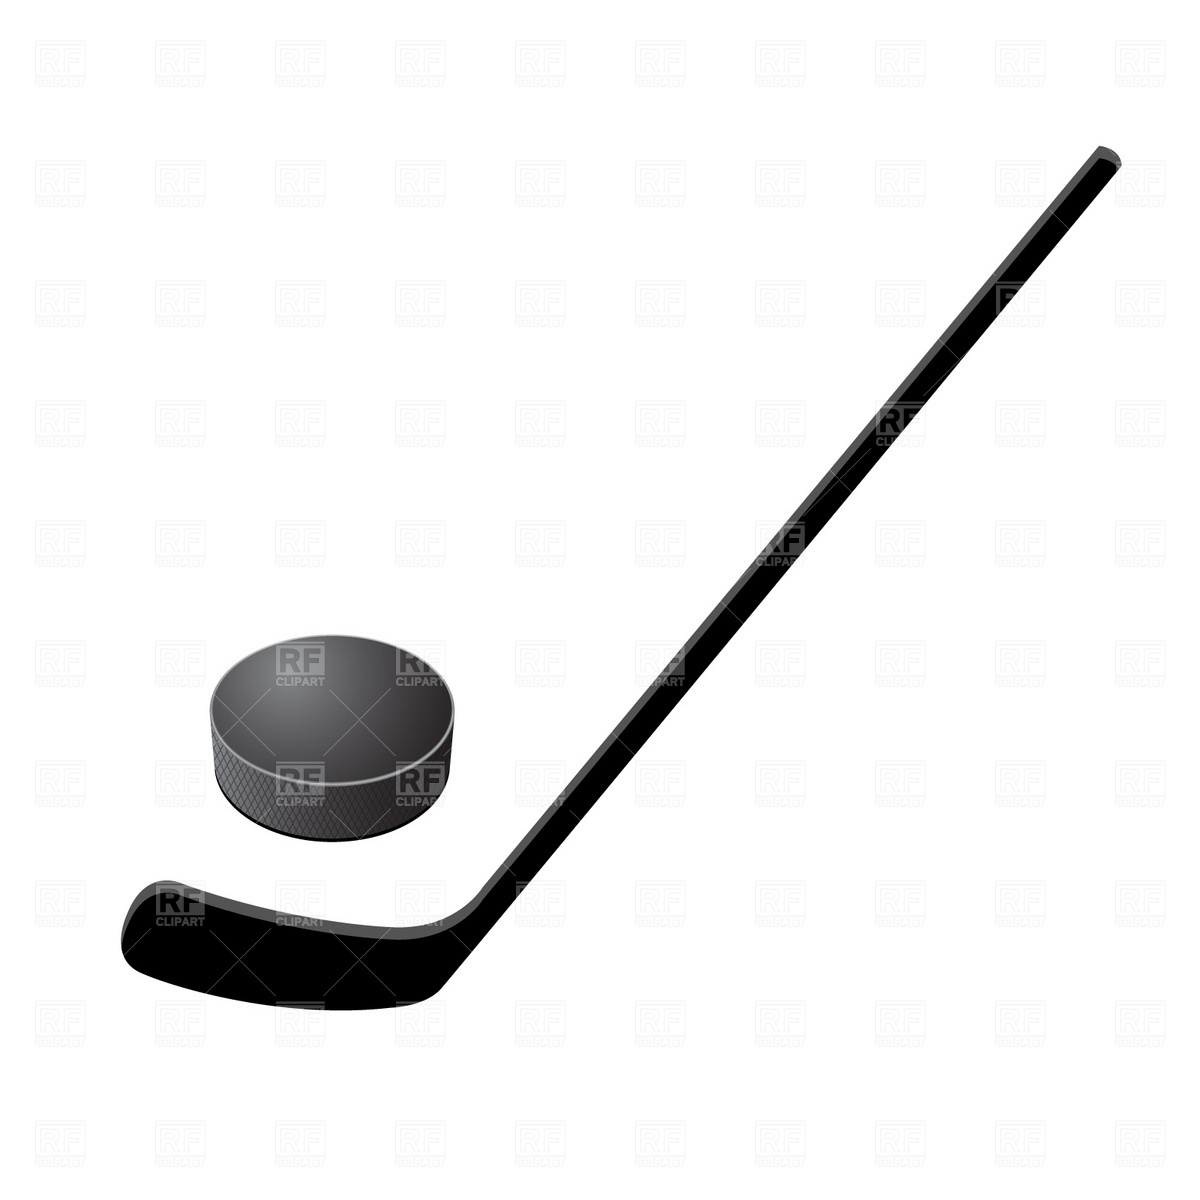 Hockey Stick And Puck 1677 Download Free Vector Clipart  Eps